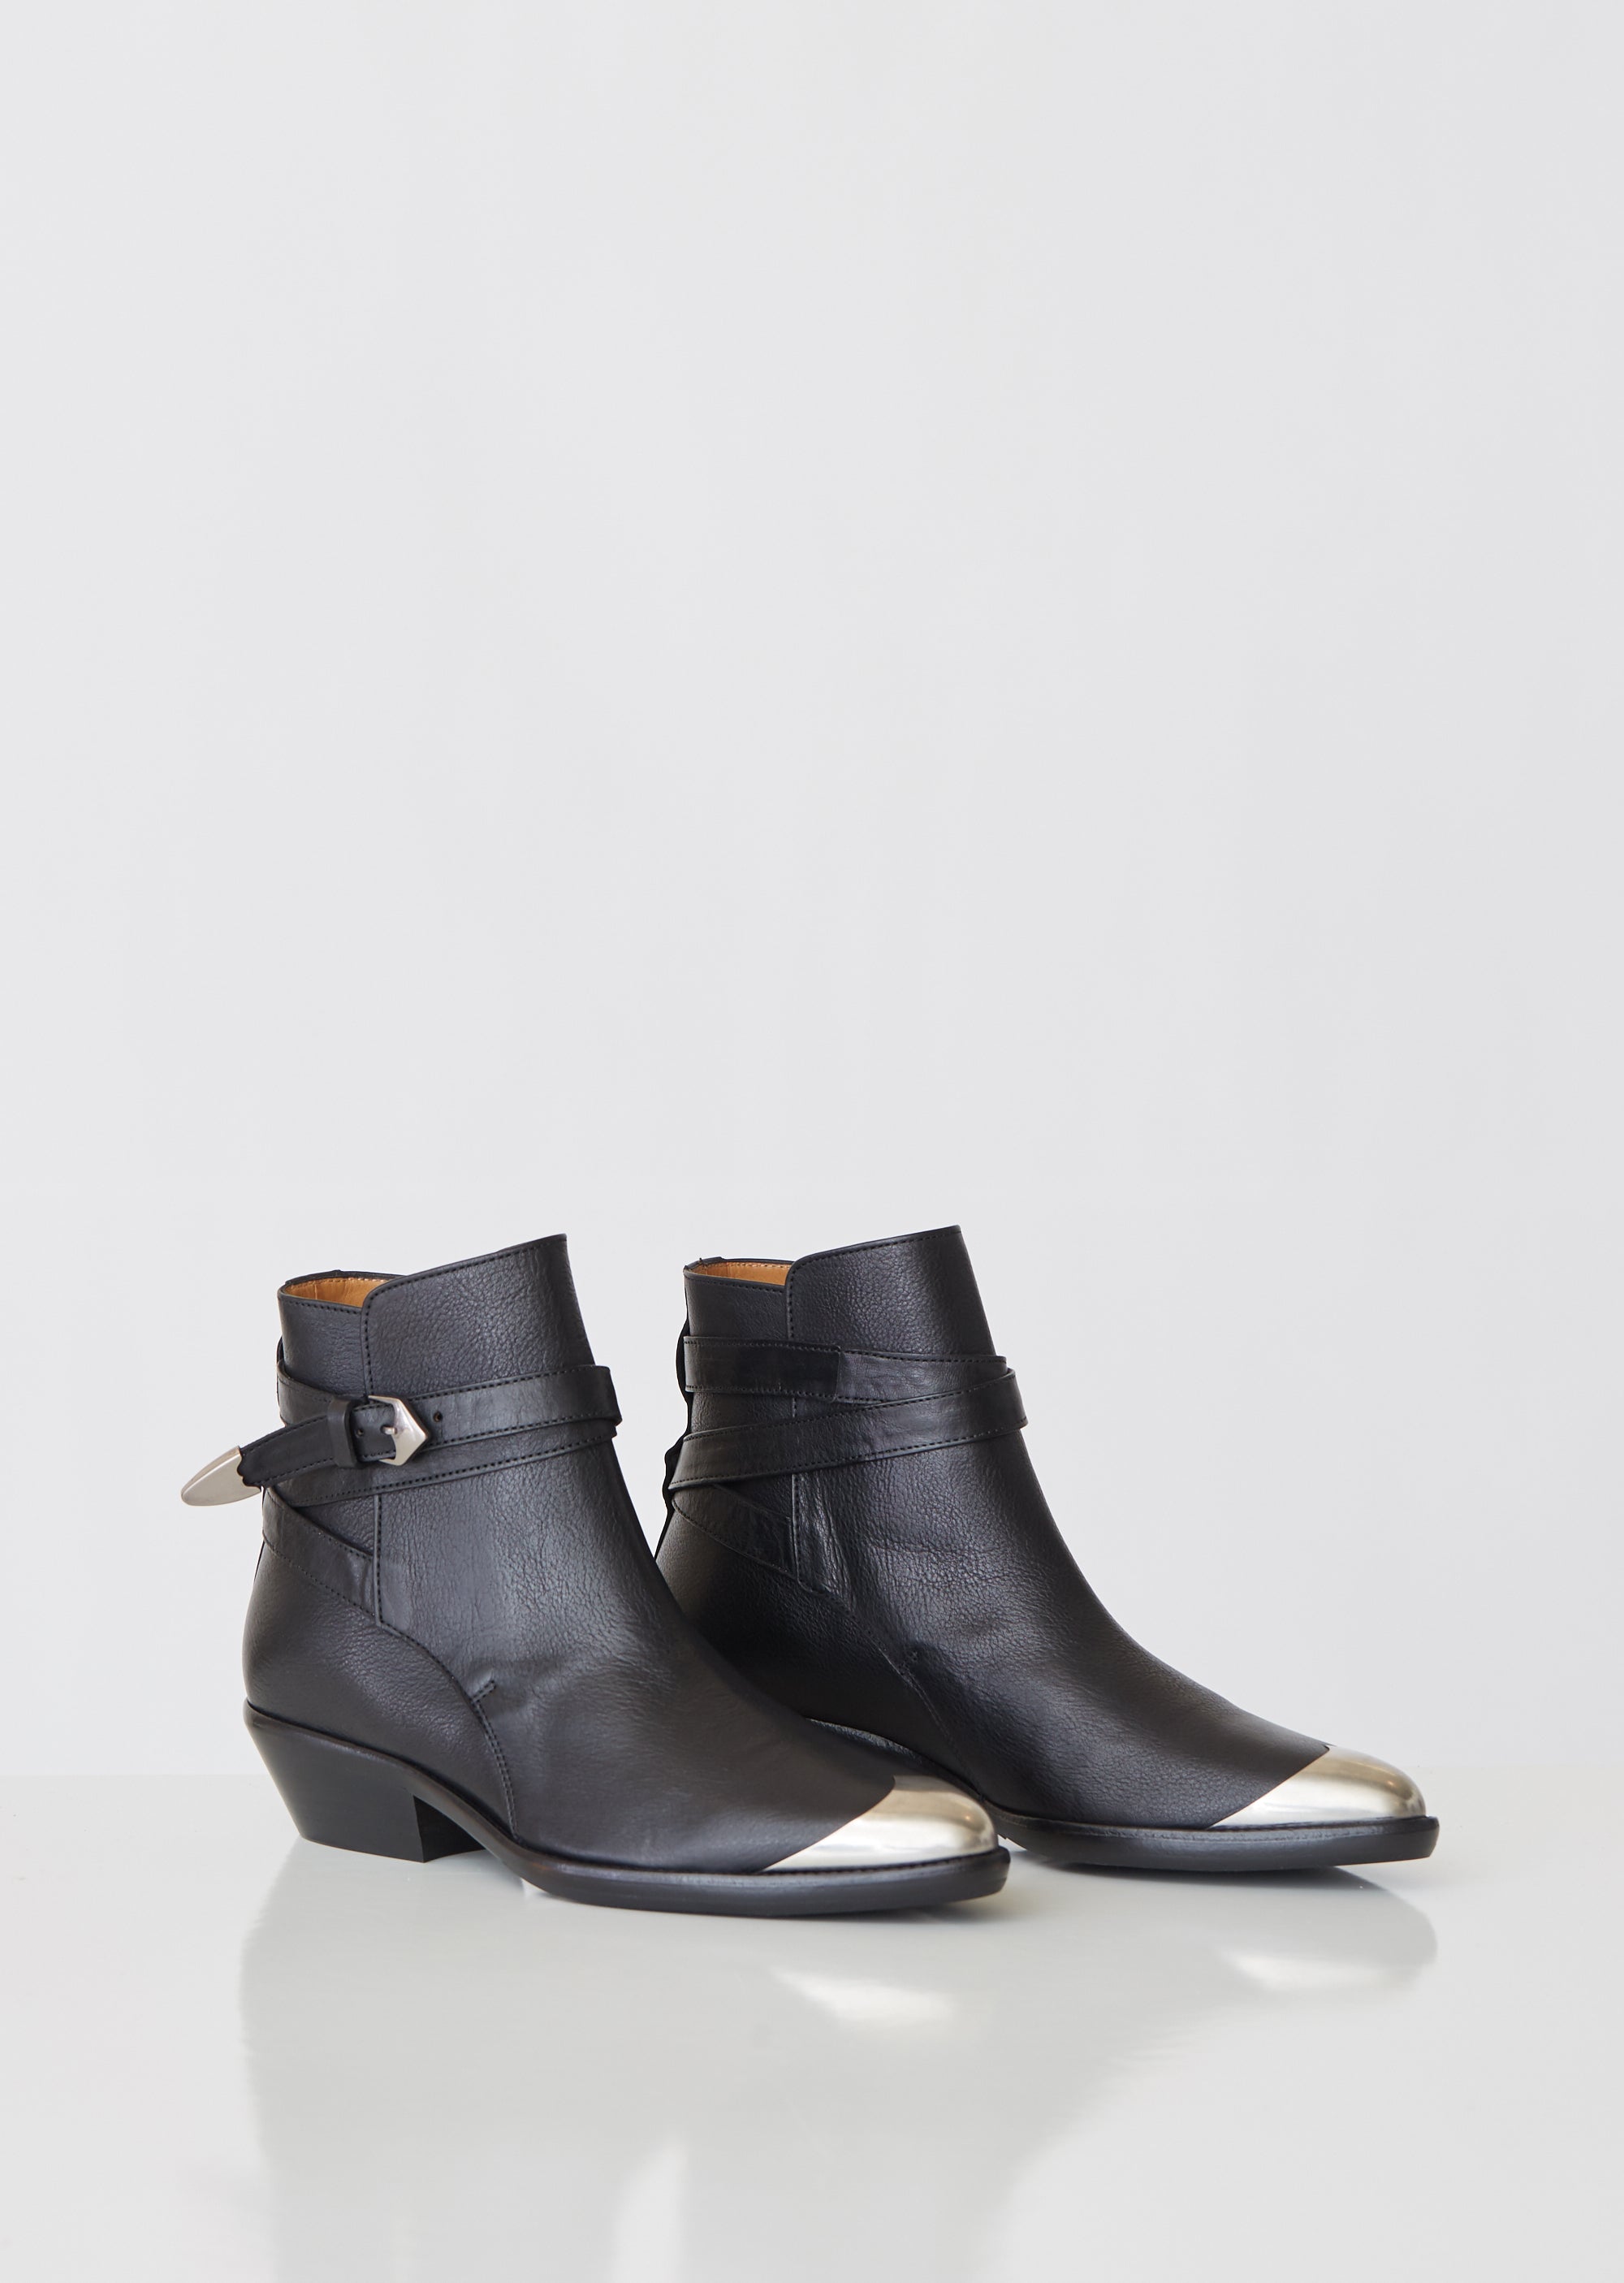 Donee Ankle Boots by Isabel Marant- La 